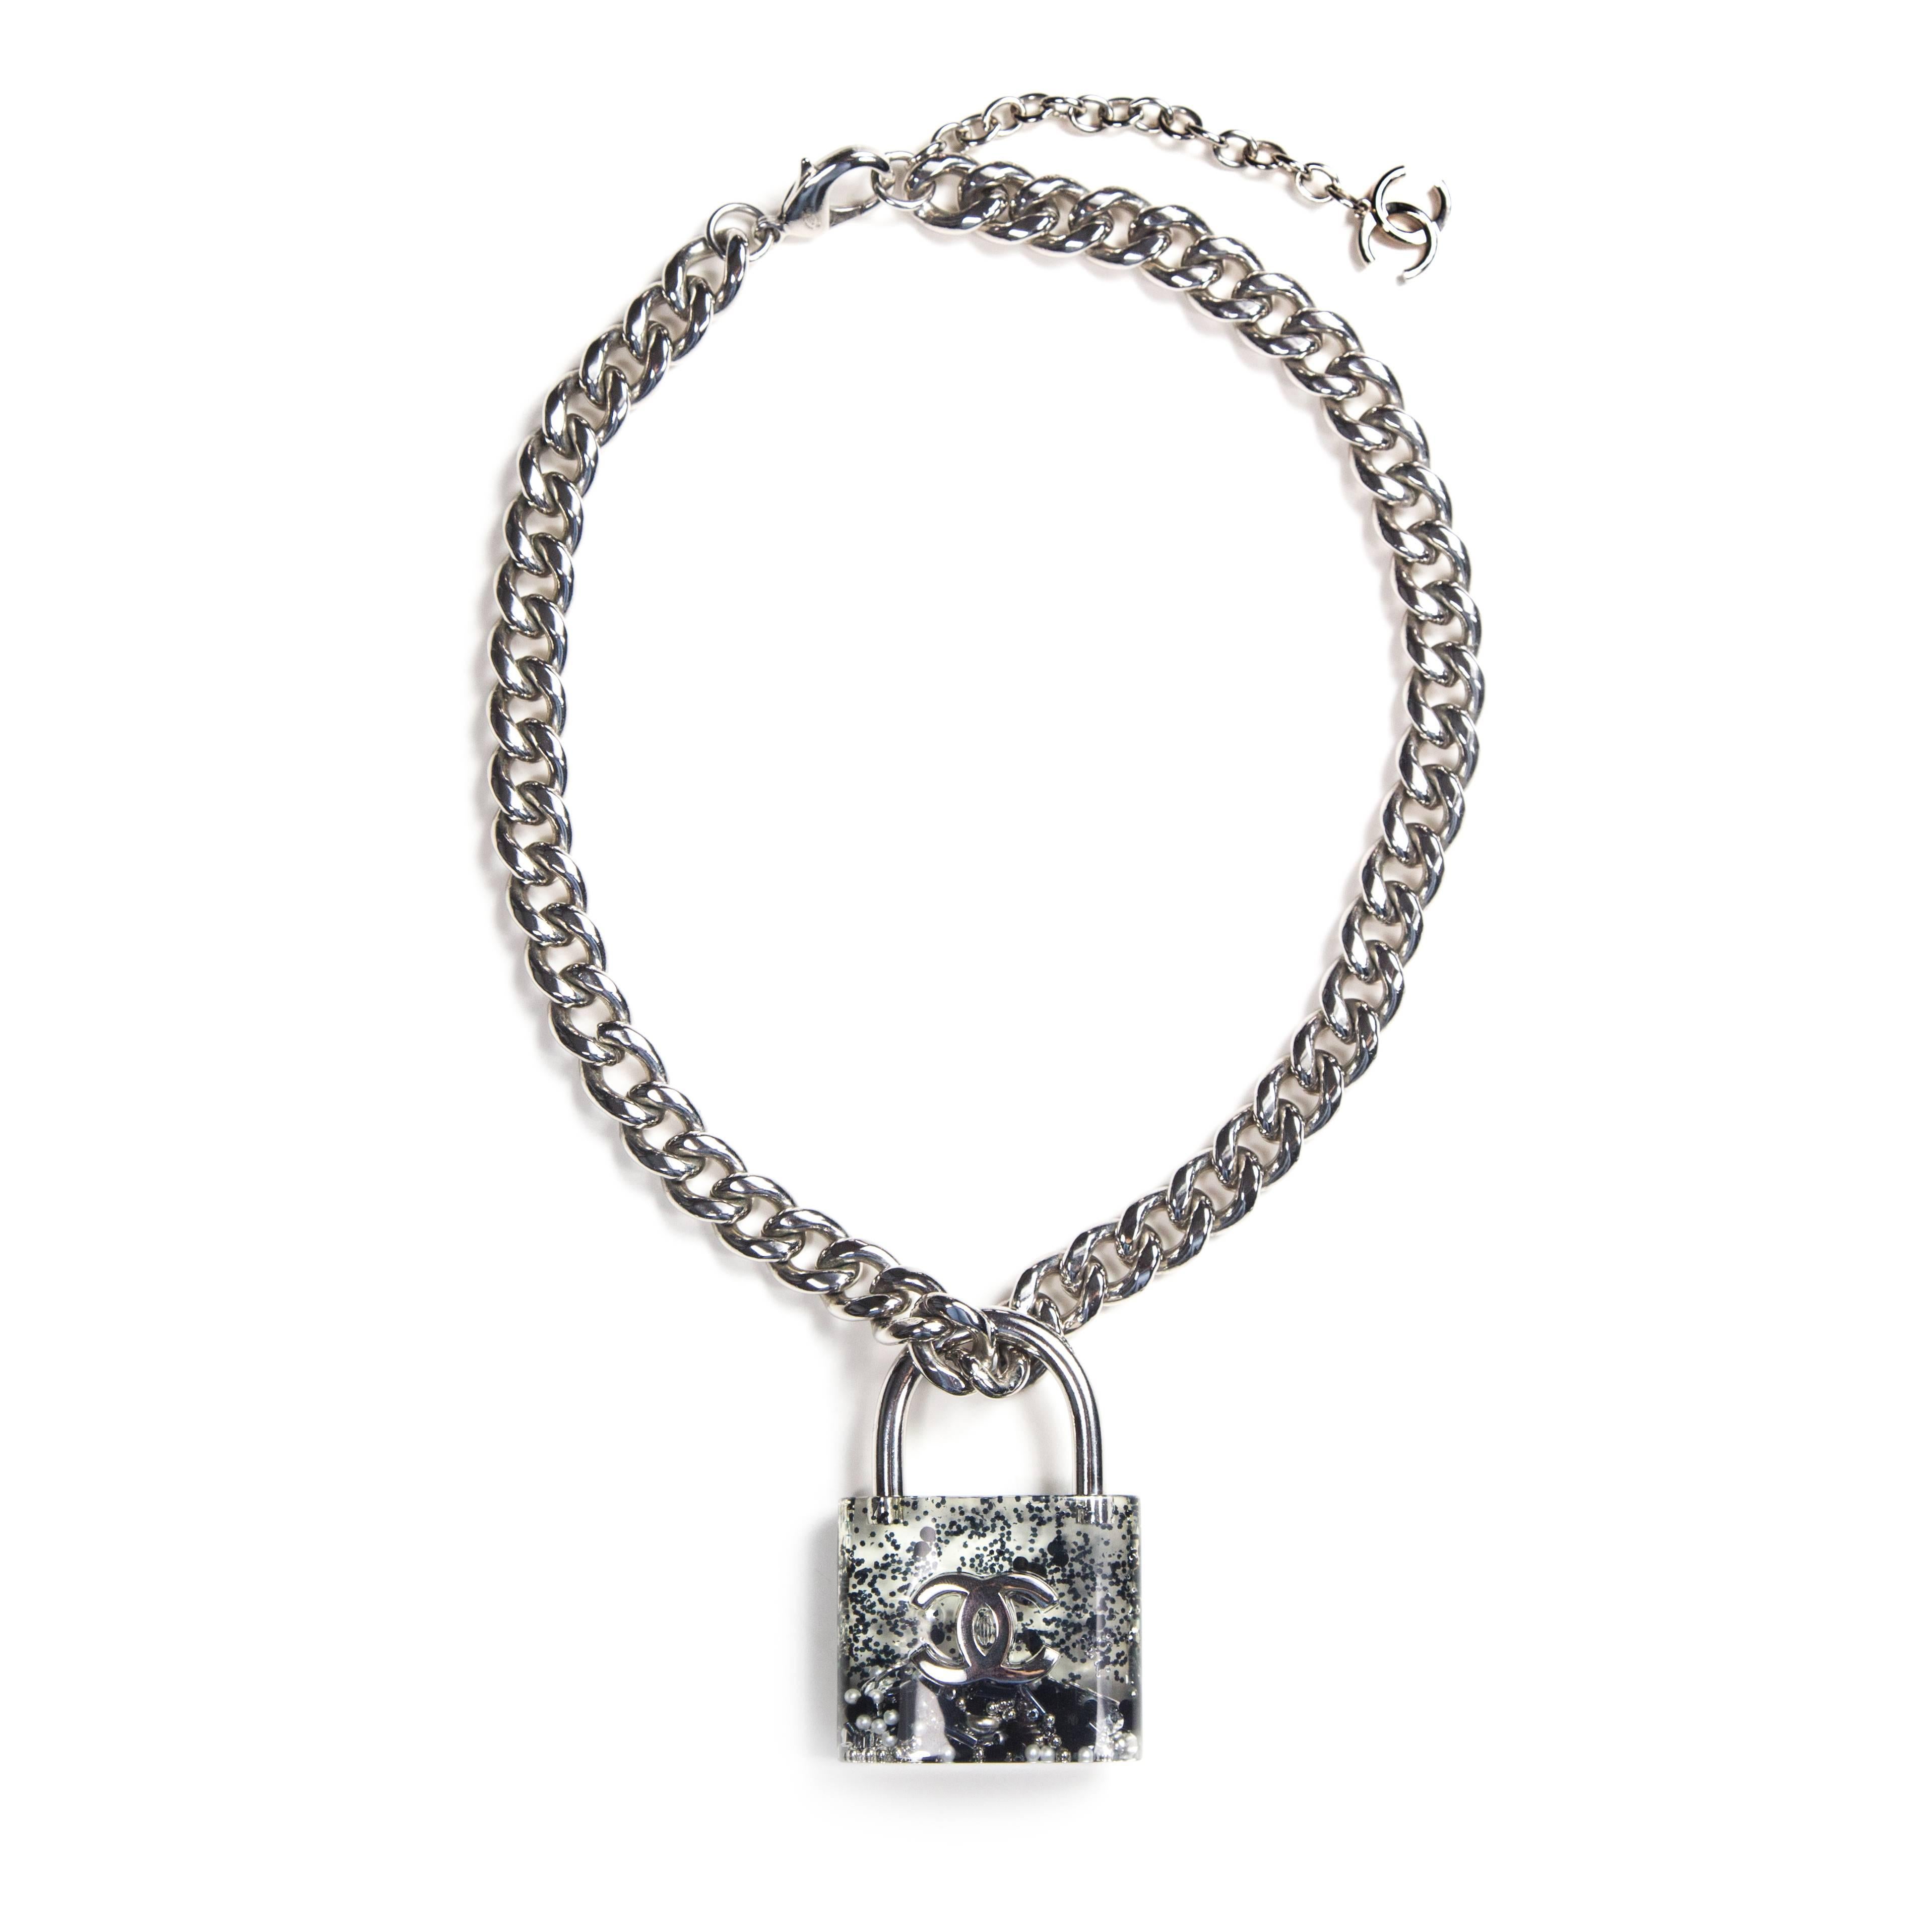 Chanel - Rare Large Padlock Necklace

with tiny pearls & glitter

Color: Silver / Black

Material: Metal

------------------------------------------------------------

Details:

- this is the rare LARGE clear padlock charm

which was never